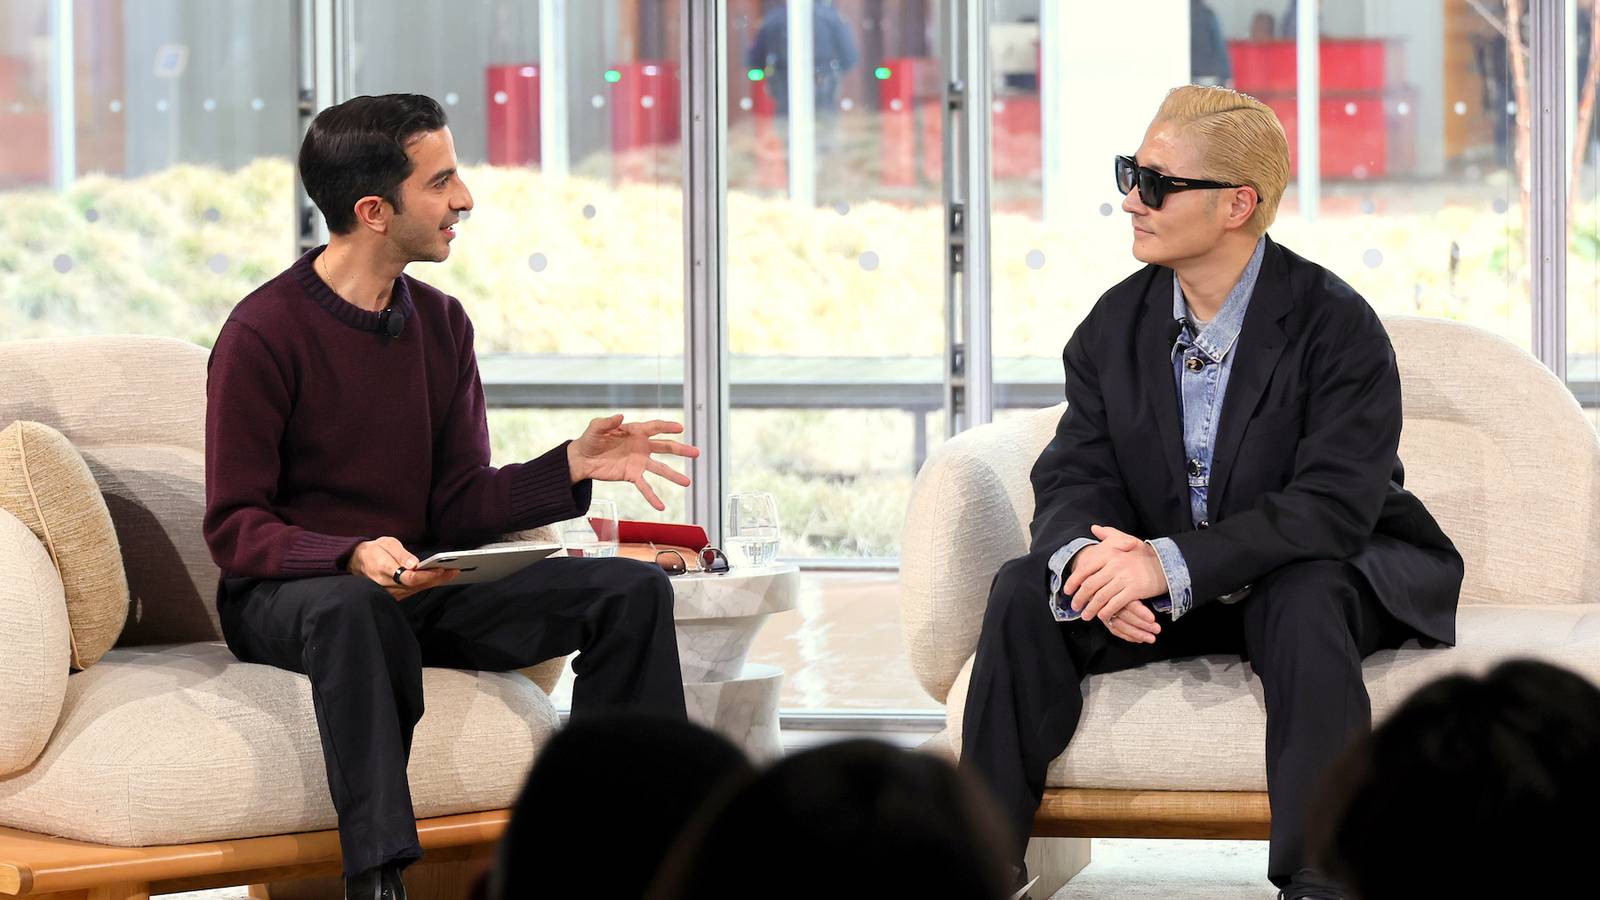 Imran Amed, Founder and CEO of The Business of Fashion, and VERBAL, Chief Executive and Artist, AMBUSH®, seated on stage at The BoF Professional Summit at The Times Center in New York City.